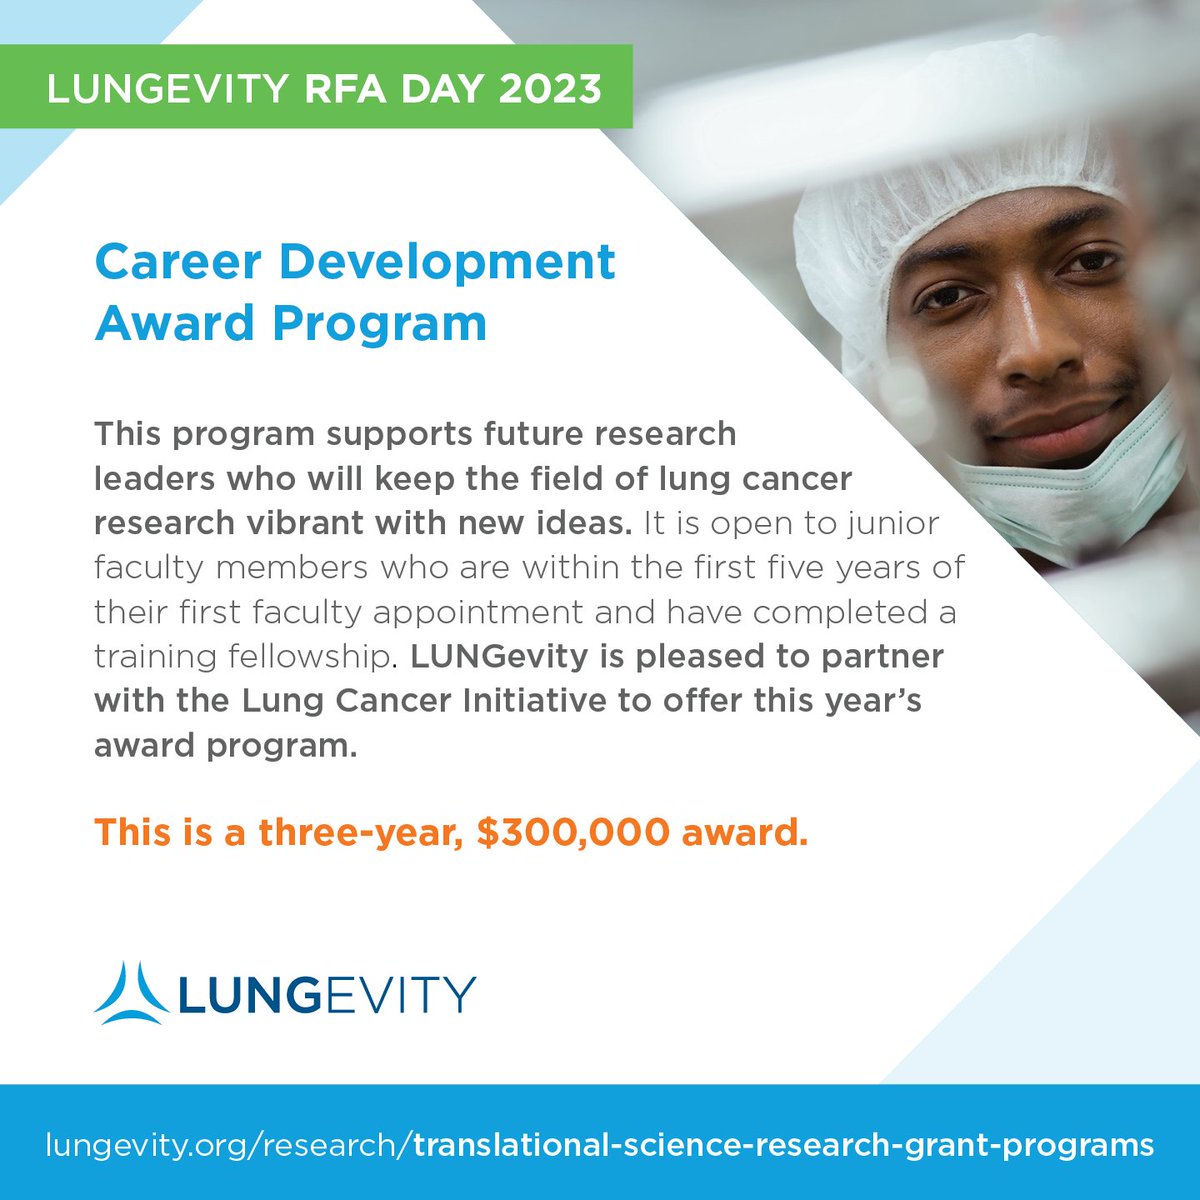 Request for applications: Lungevity is proud to partner with the #LungCancerInitiative on the #CareerDevelopmentAward for future #research leaders in lung cancer. To learn more and apply, visit bit.ly/2X7P3na
#cancerresearch #lungcancer #RFADAY #RFA